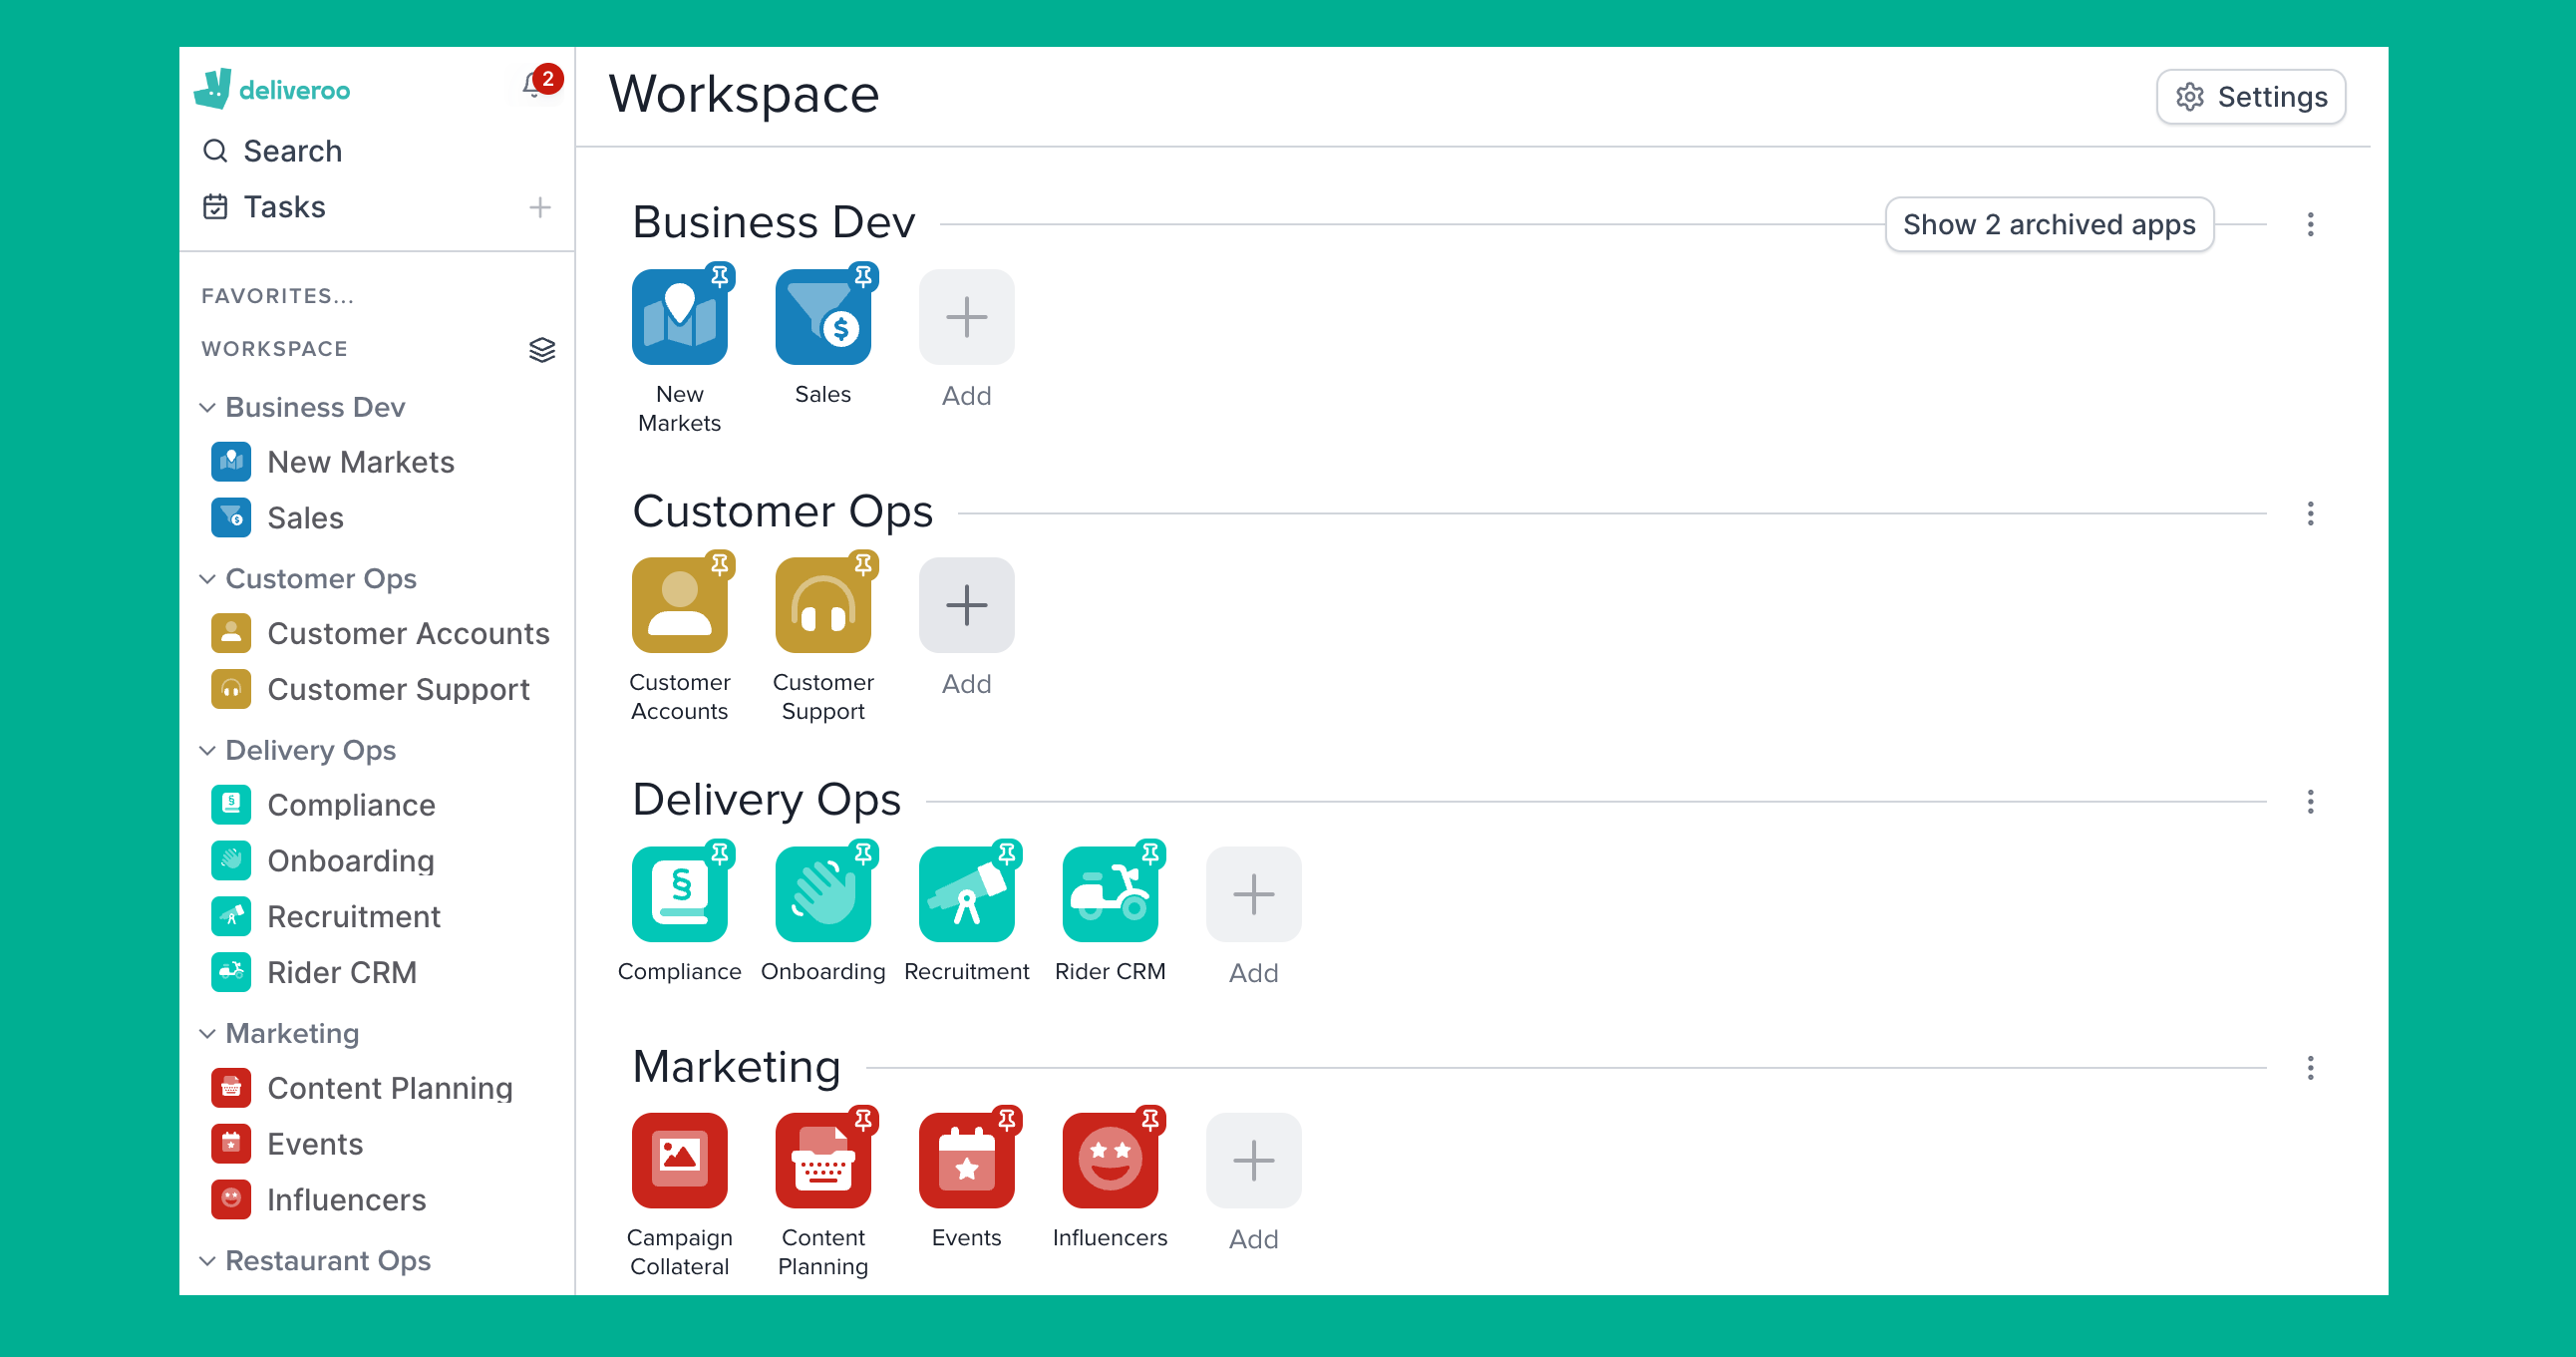 Organize your apps into Workspace App Groups